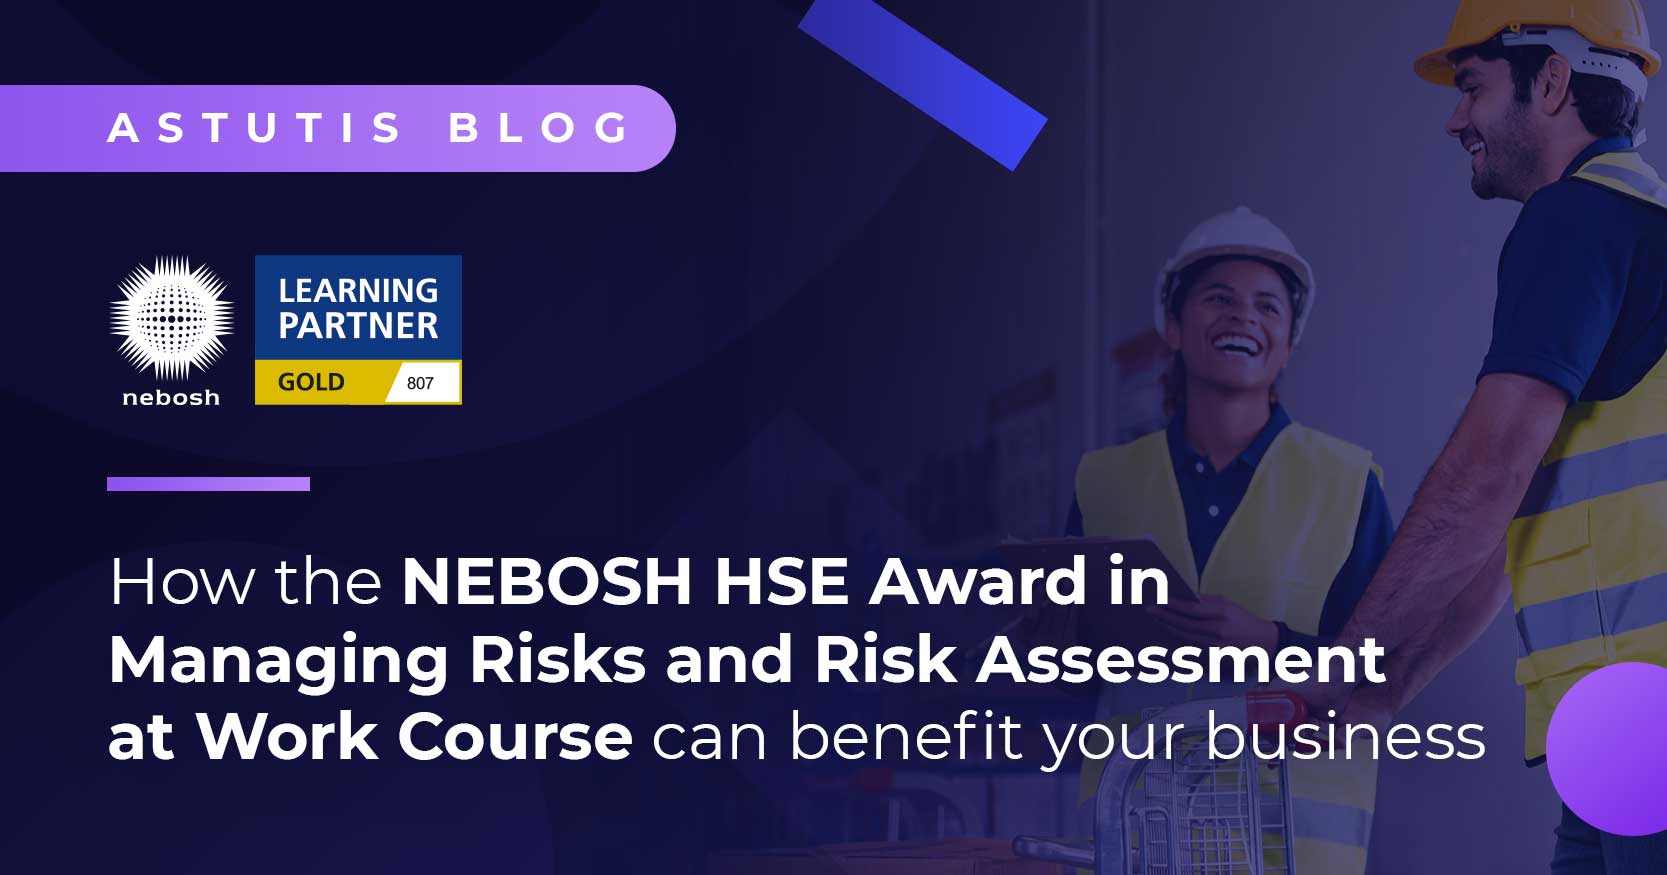 How Can the NEBOSH HSE Award in Managing Risks and Risk Assessment at Work Benefit Your Business? Image